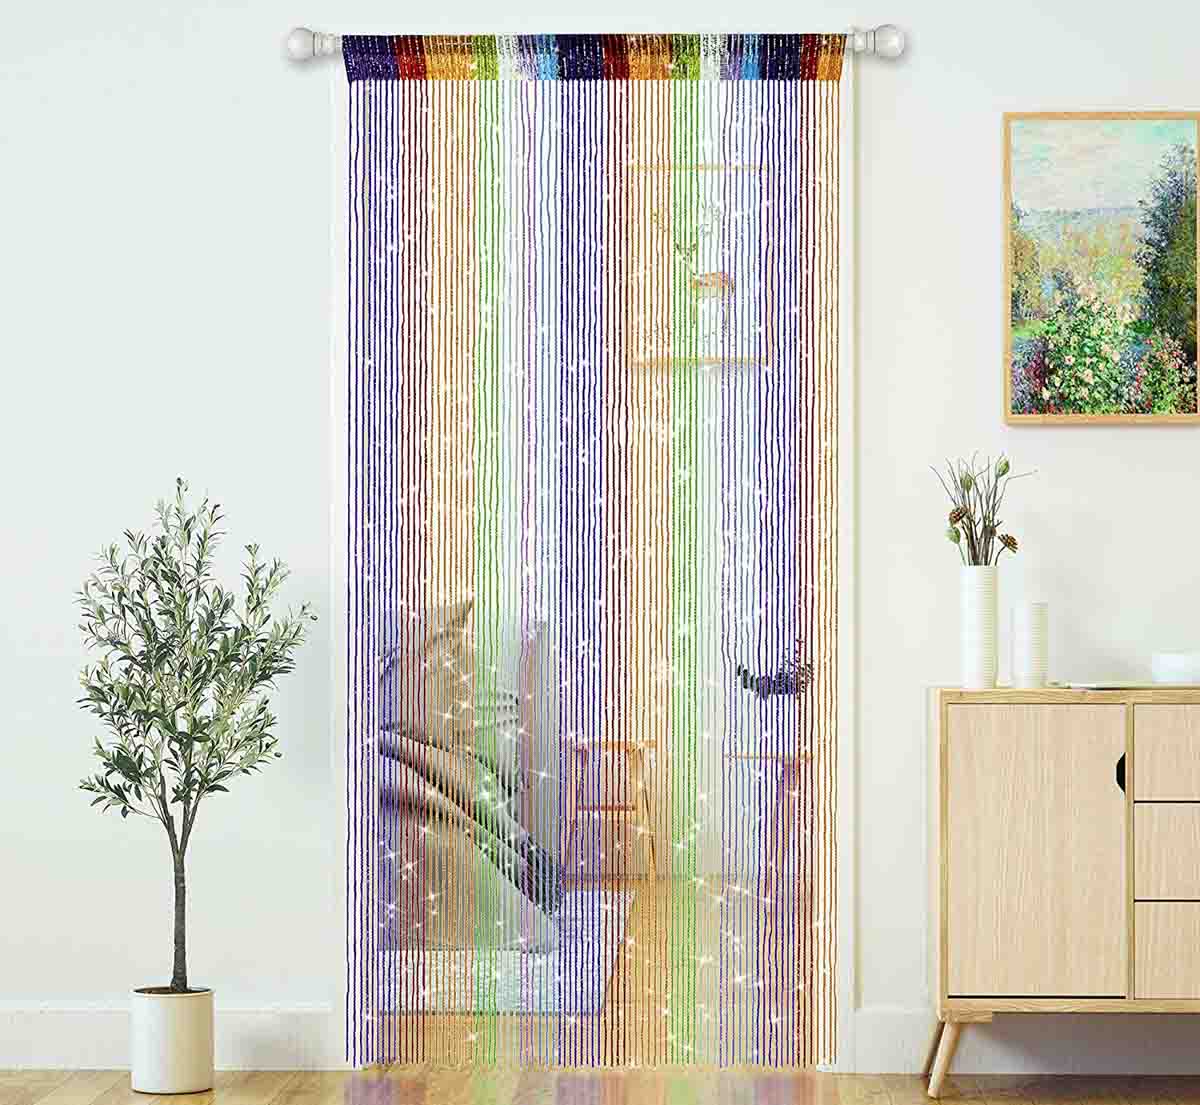 beaded curtain hanging over a rod